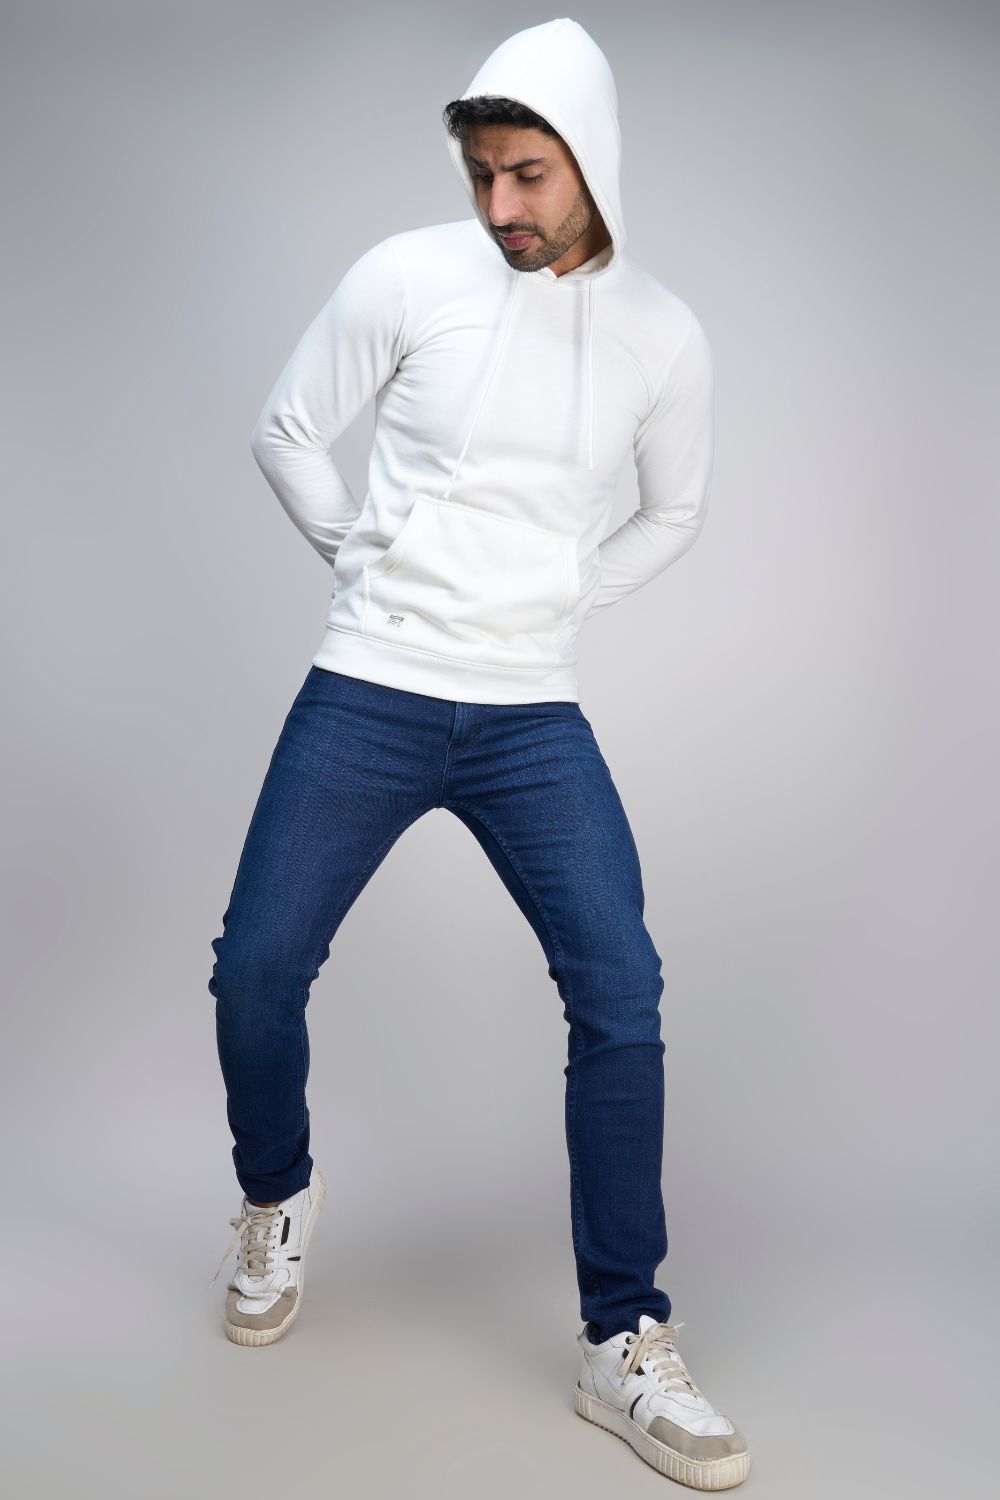 A model wearing White colored, hoodie for men with full sleeves and relaxed fit.